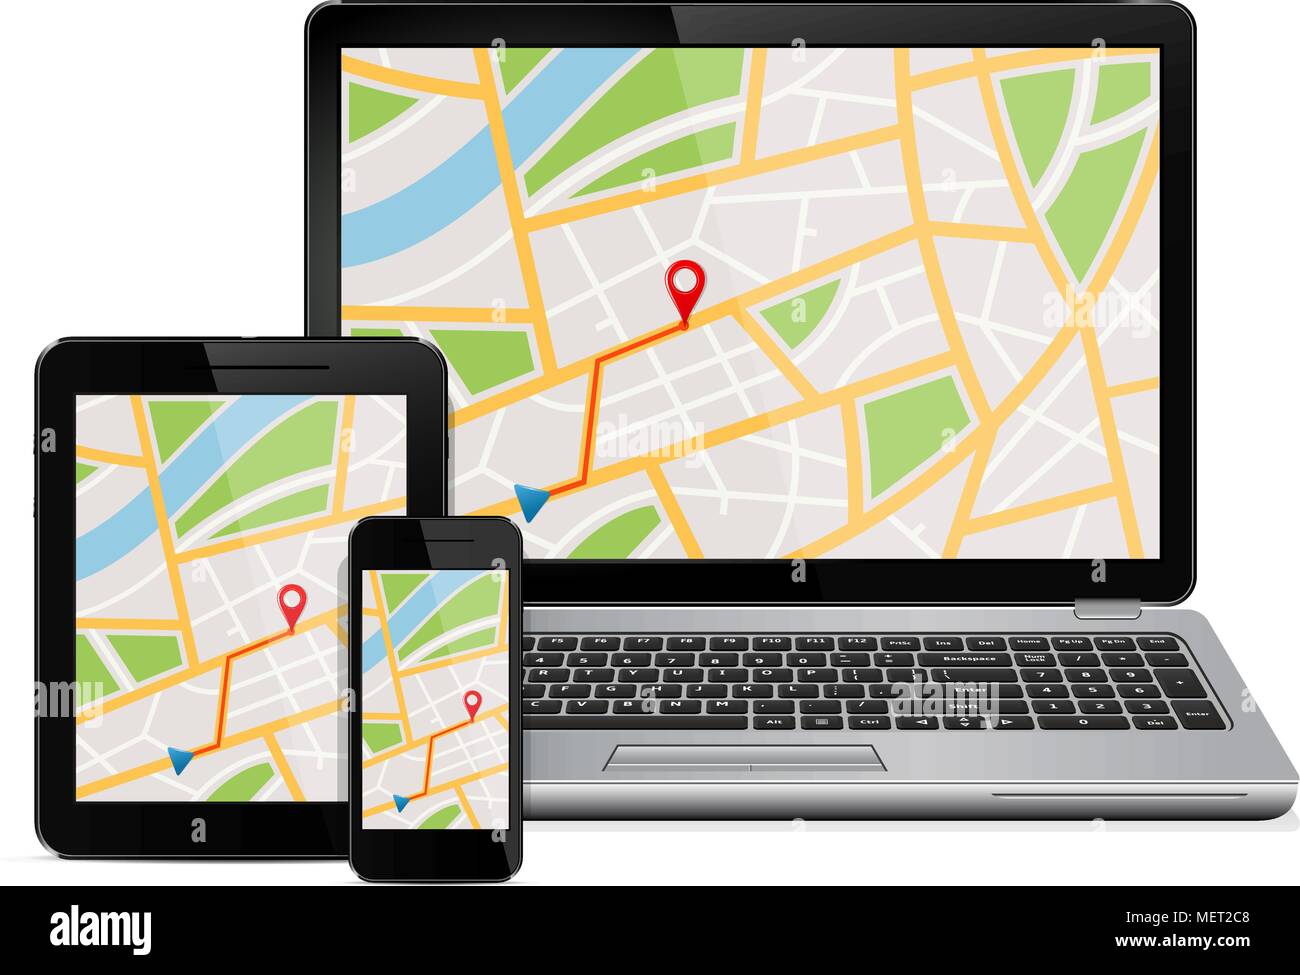 GPS navigation map on display of modern digital devices Stock Vector